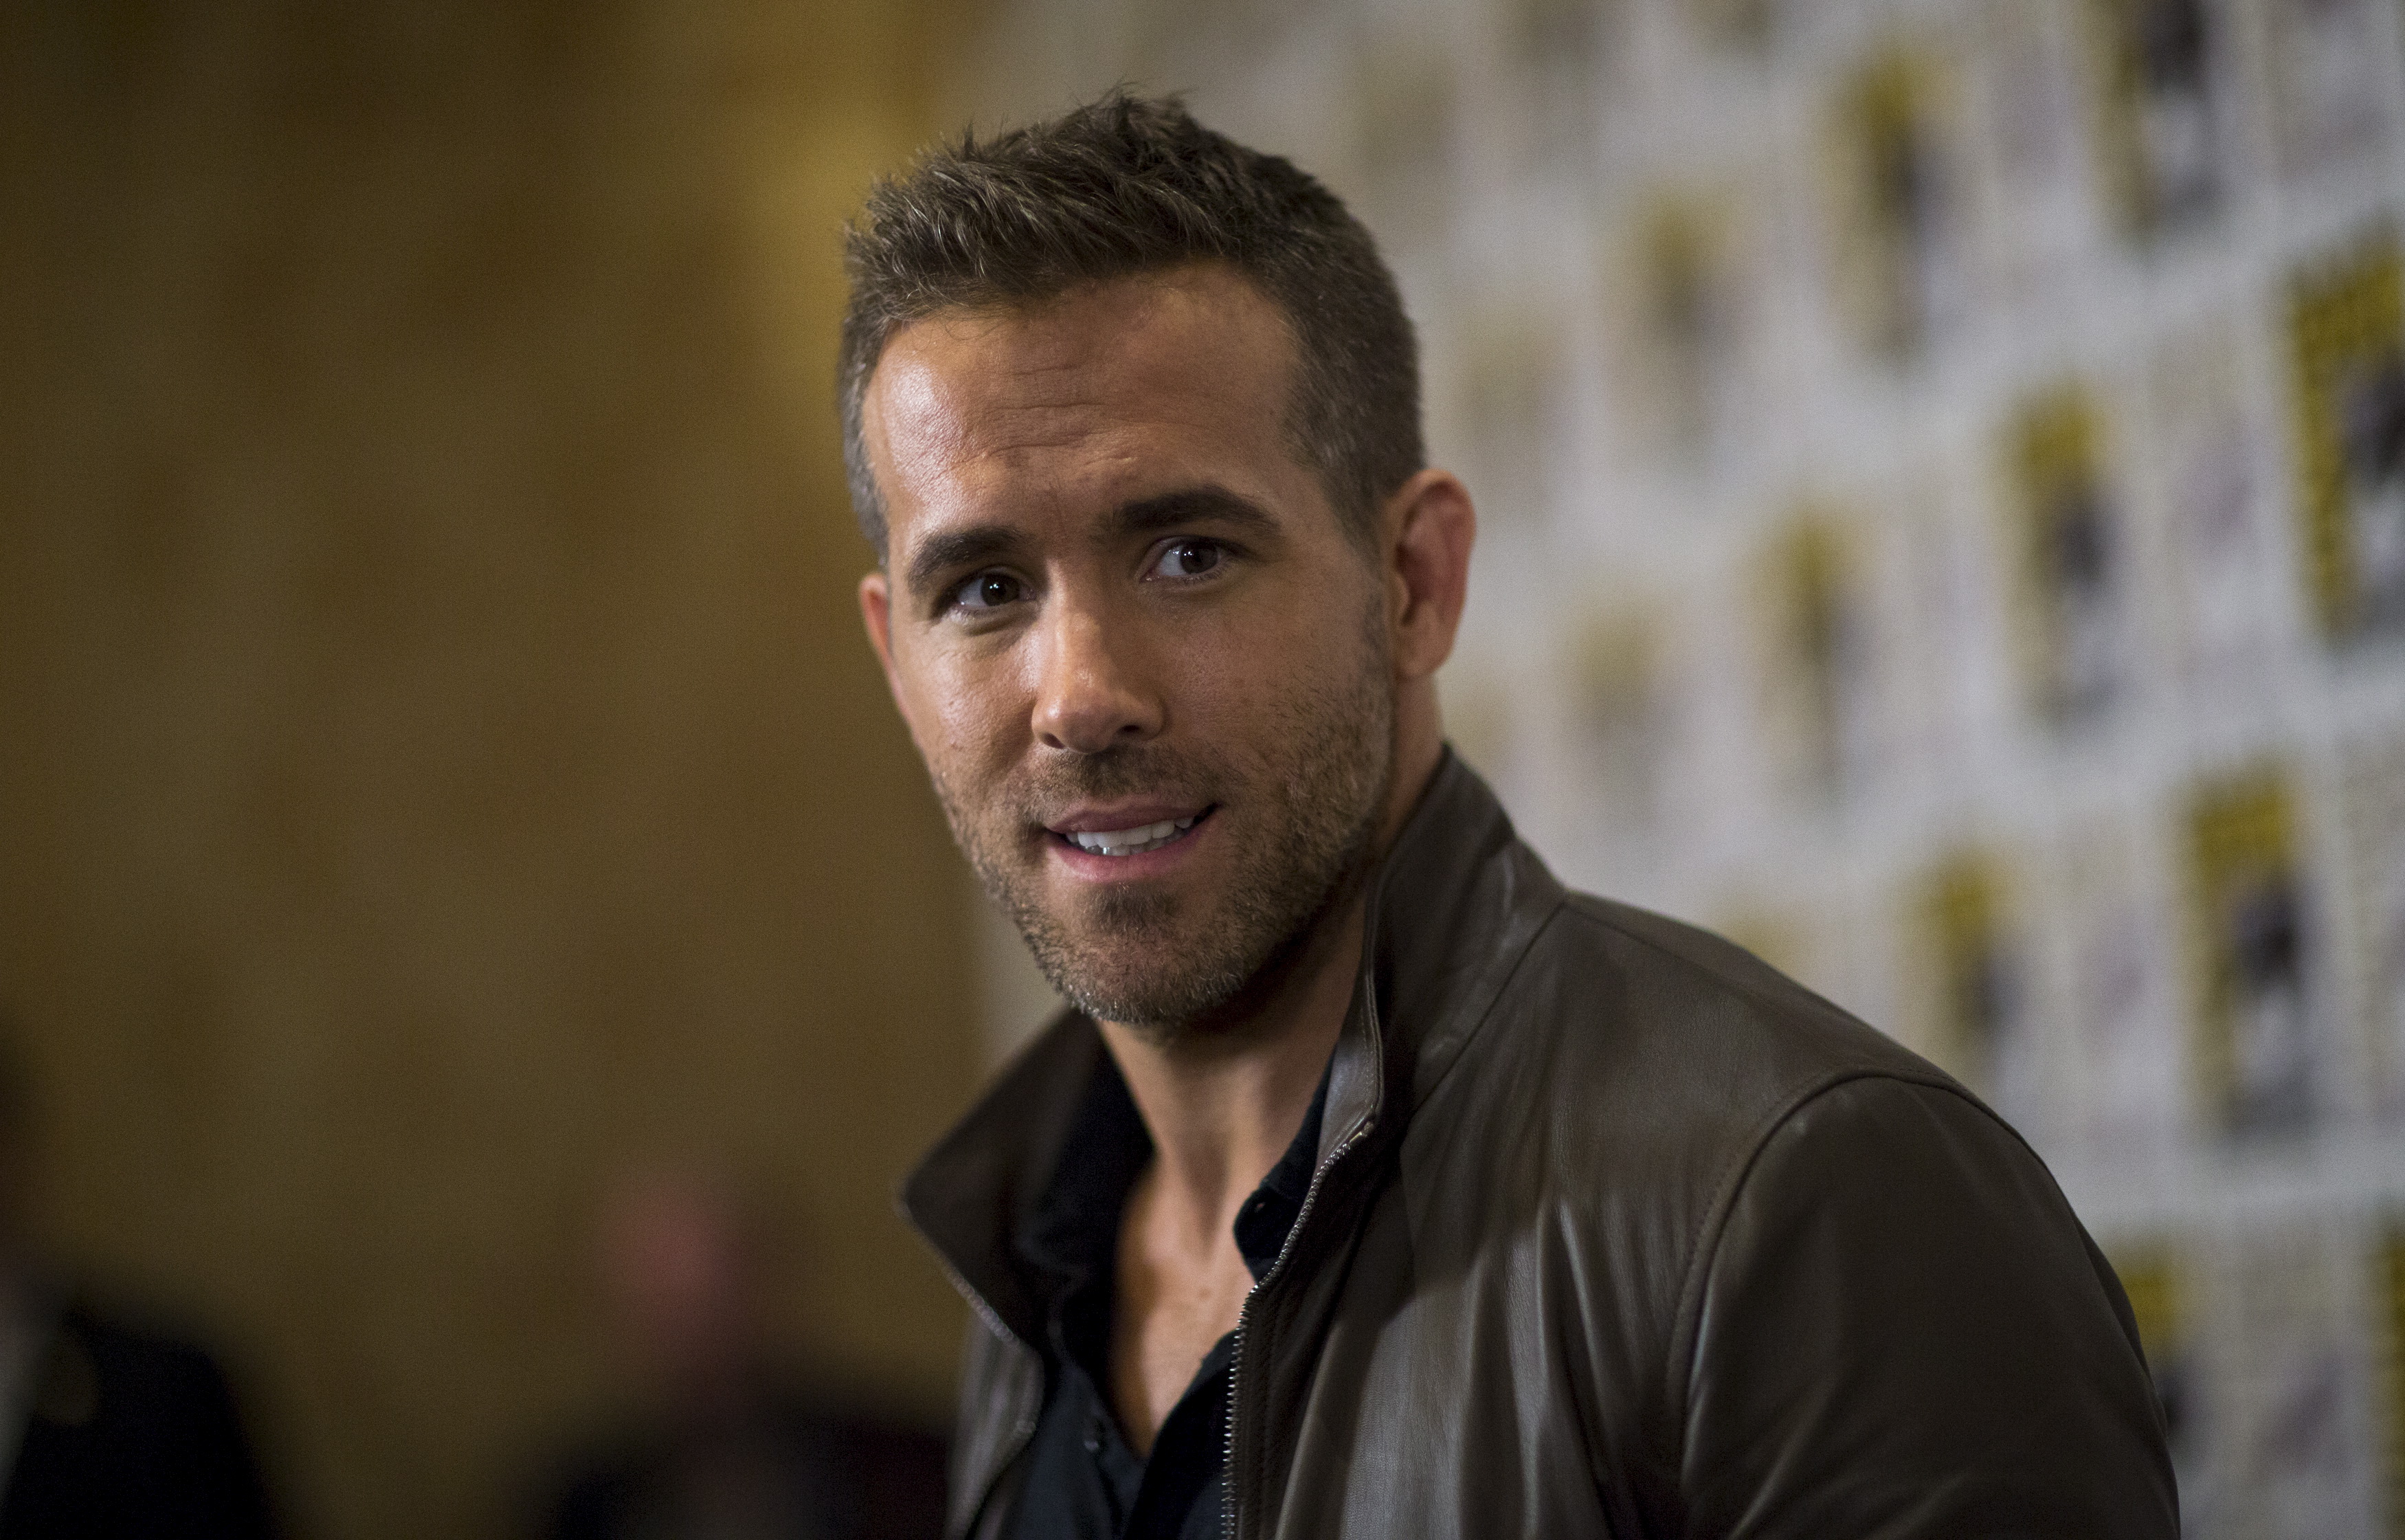 Ryan Reynolds Backgrounds, Compatible - PC, Mobile, Gadgets| 3500x2241 px